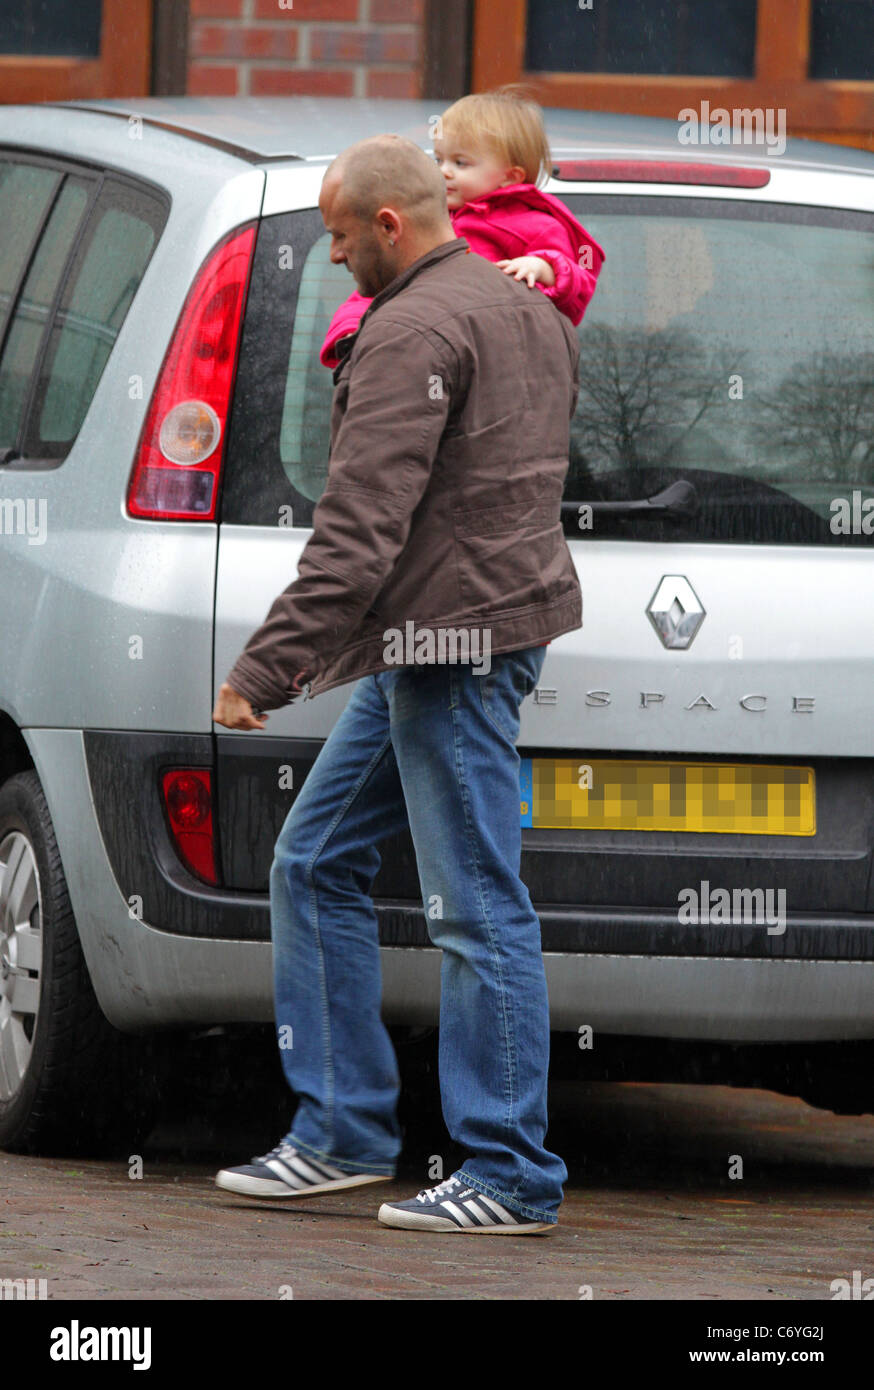 Mark Croft leaves Kerry Katona's home after collecting their children Cheshire, England - 20.03.10 Stock Photo